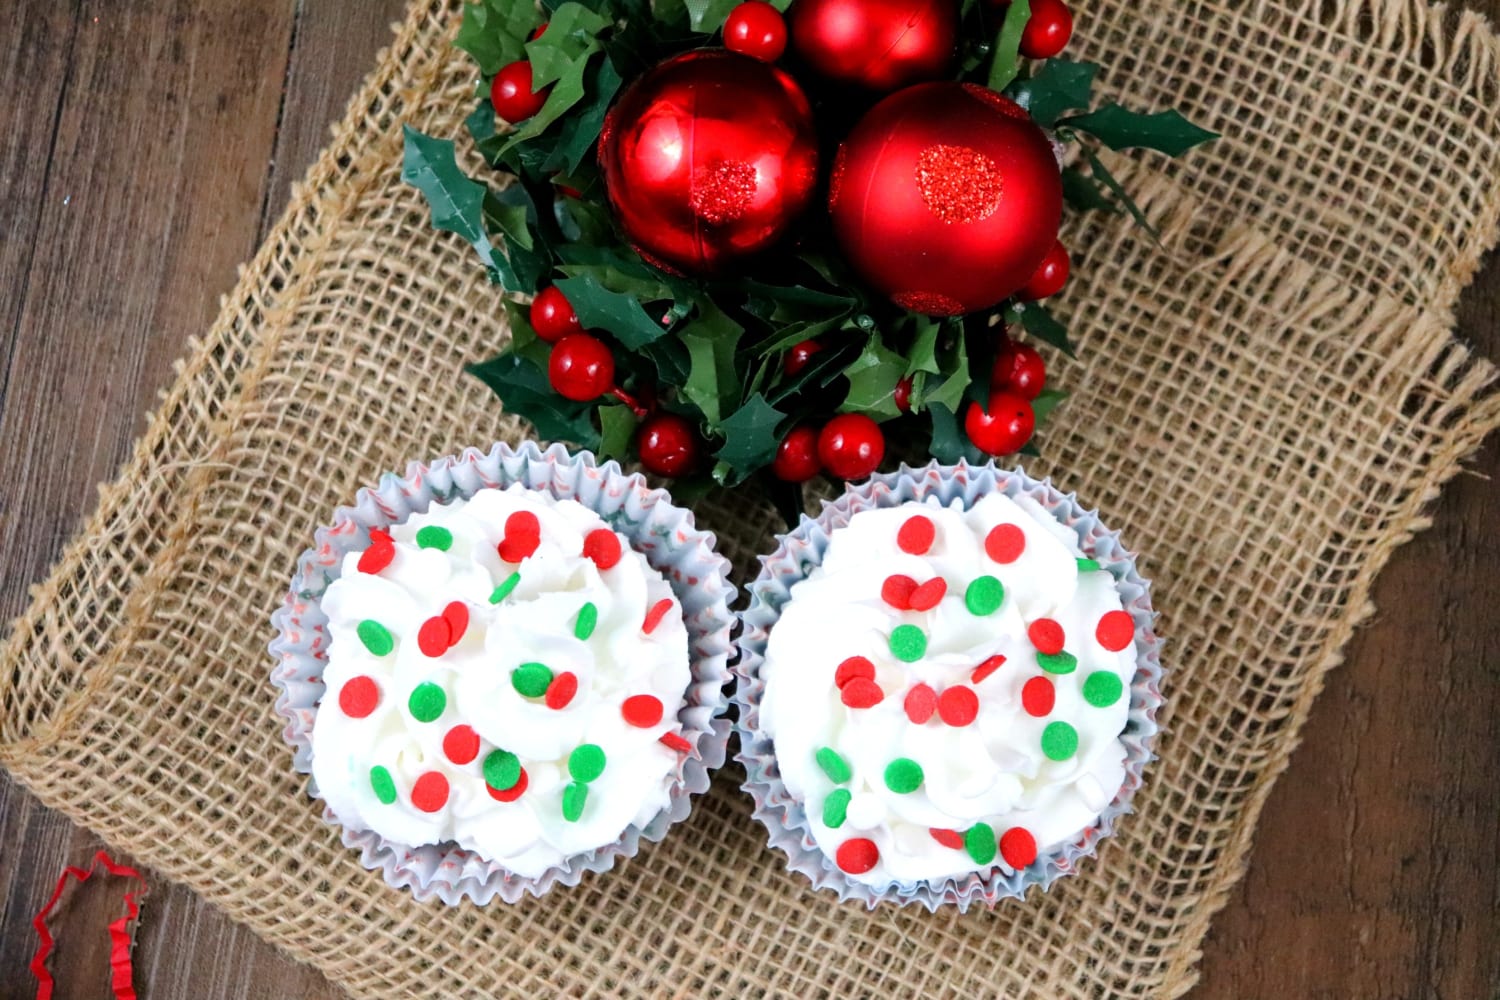 DIY Christmas Cupcake Bath Bombs with Soap Frosting!